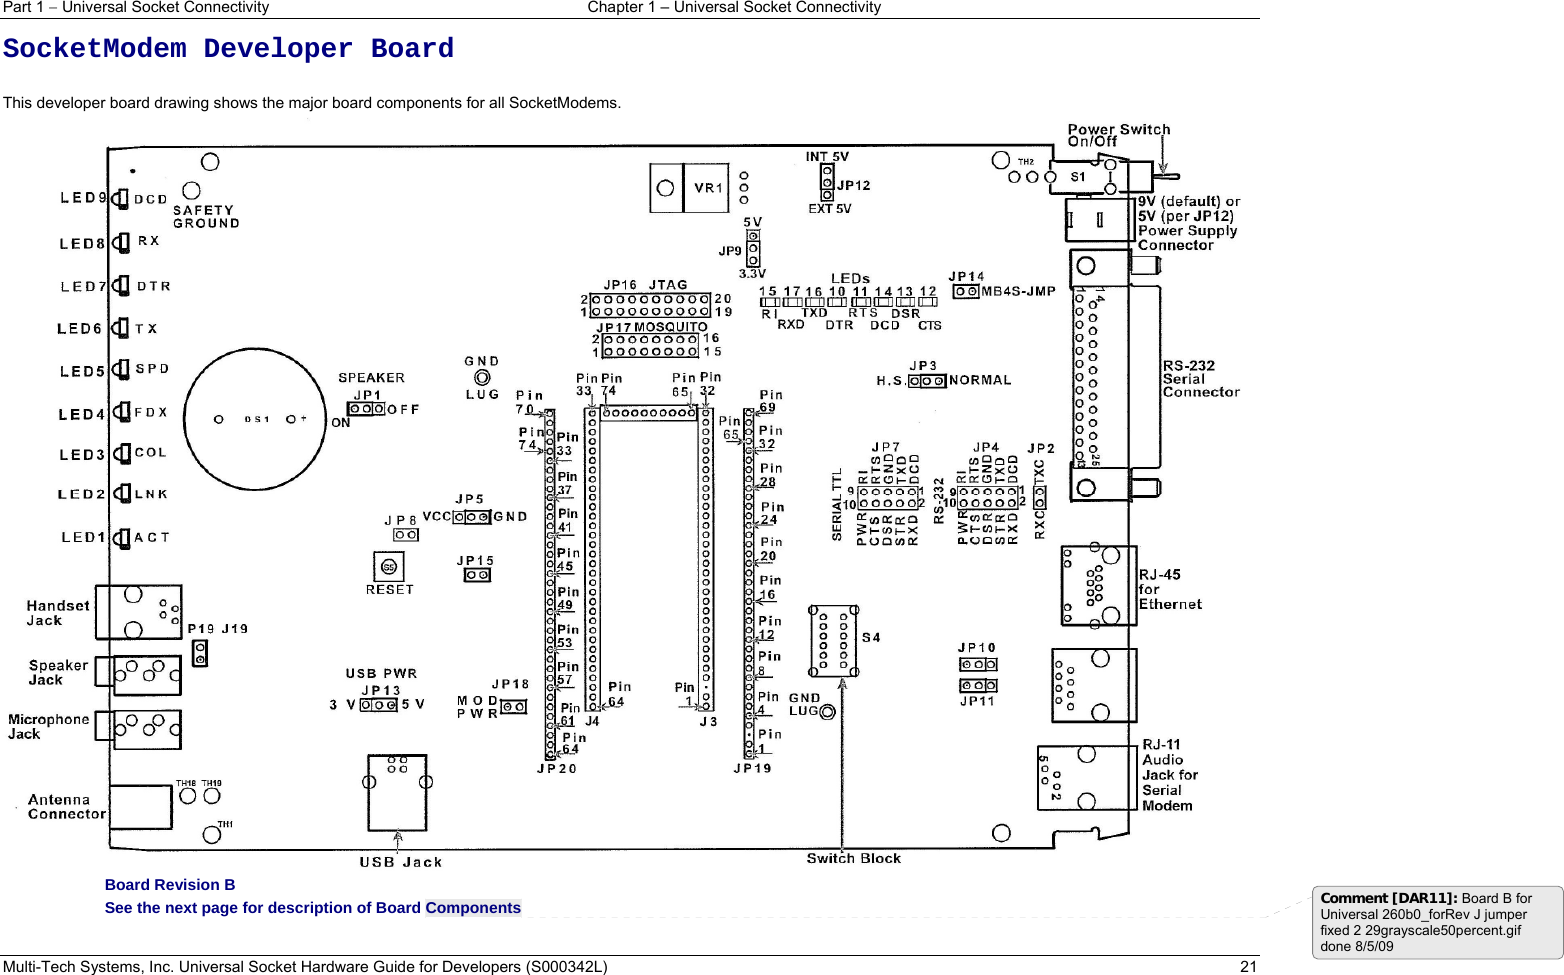 Part 1  Universal Socket Connectivity  Chapter 1 – Universal Socket Connectivity Multi-Tech Systems, Inc. Universal Socket Hardware Guide for Developers (S000342L)  21 SocketModem Developer Board   This developer board drawing shows the major board components for all SocketModems.   Board Revision B See the next page for description of Board Components  Comment [DAR11]: Board B for Universal 260b0_forRev J jumper fixed 2 29grayscale50percent.gif done 8/5/09 